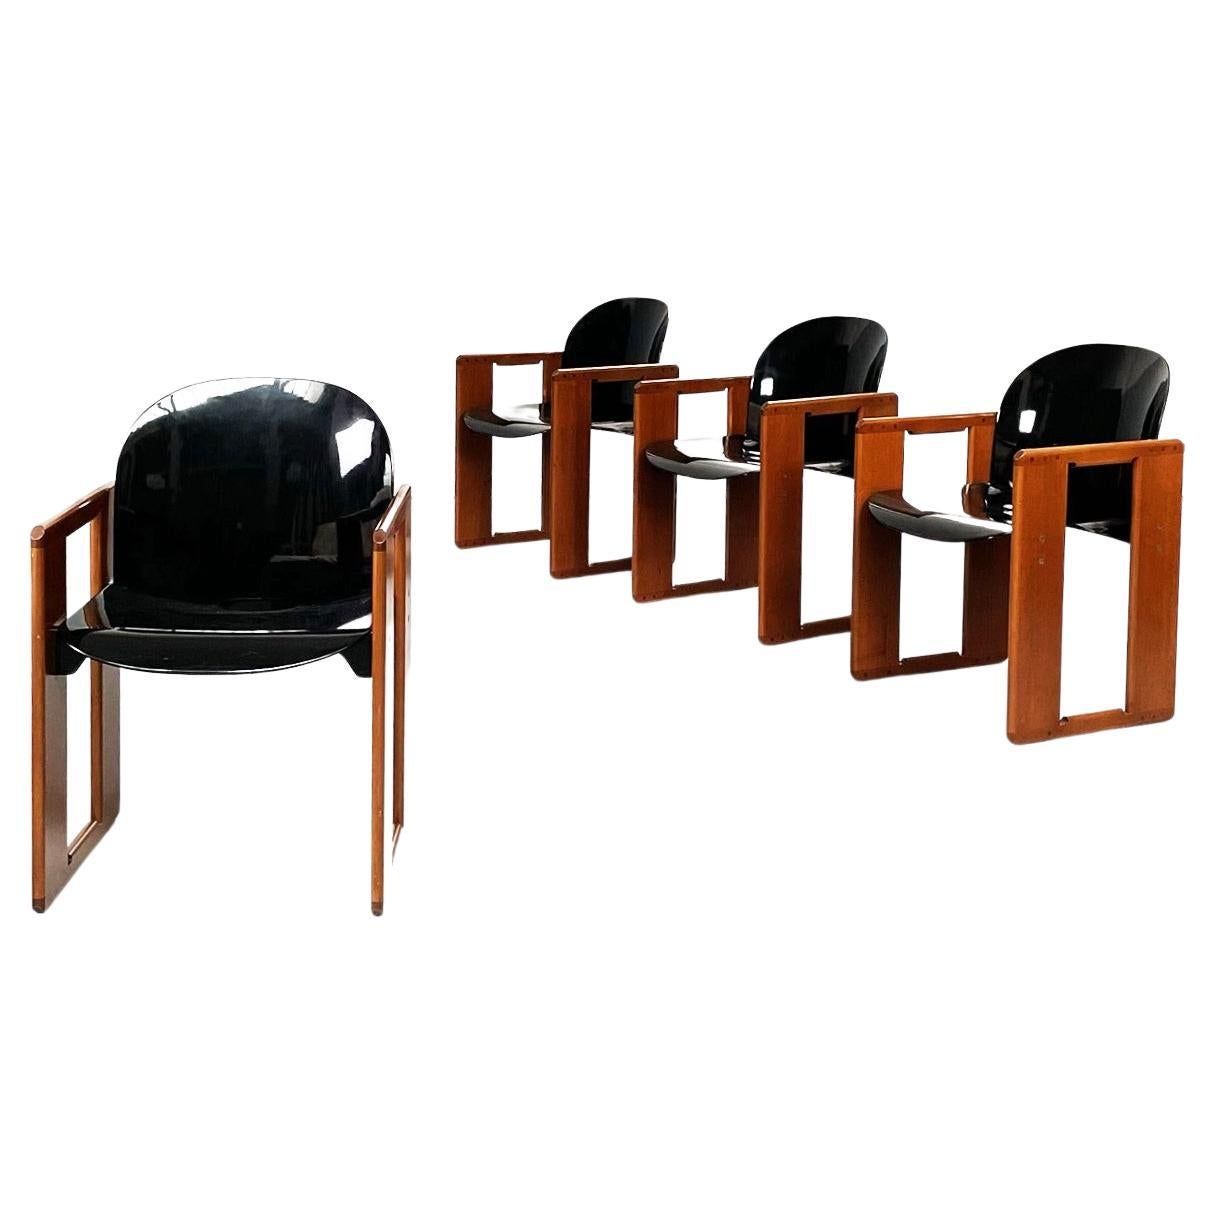 Italian Mid-Century Plastic Wood Chairs Dialogo by Tobia Scarpa for B&B, 1970s